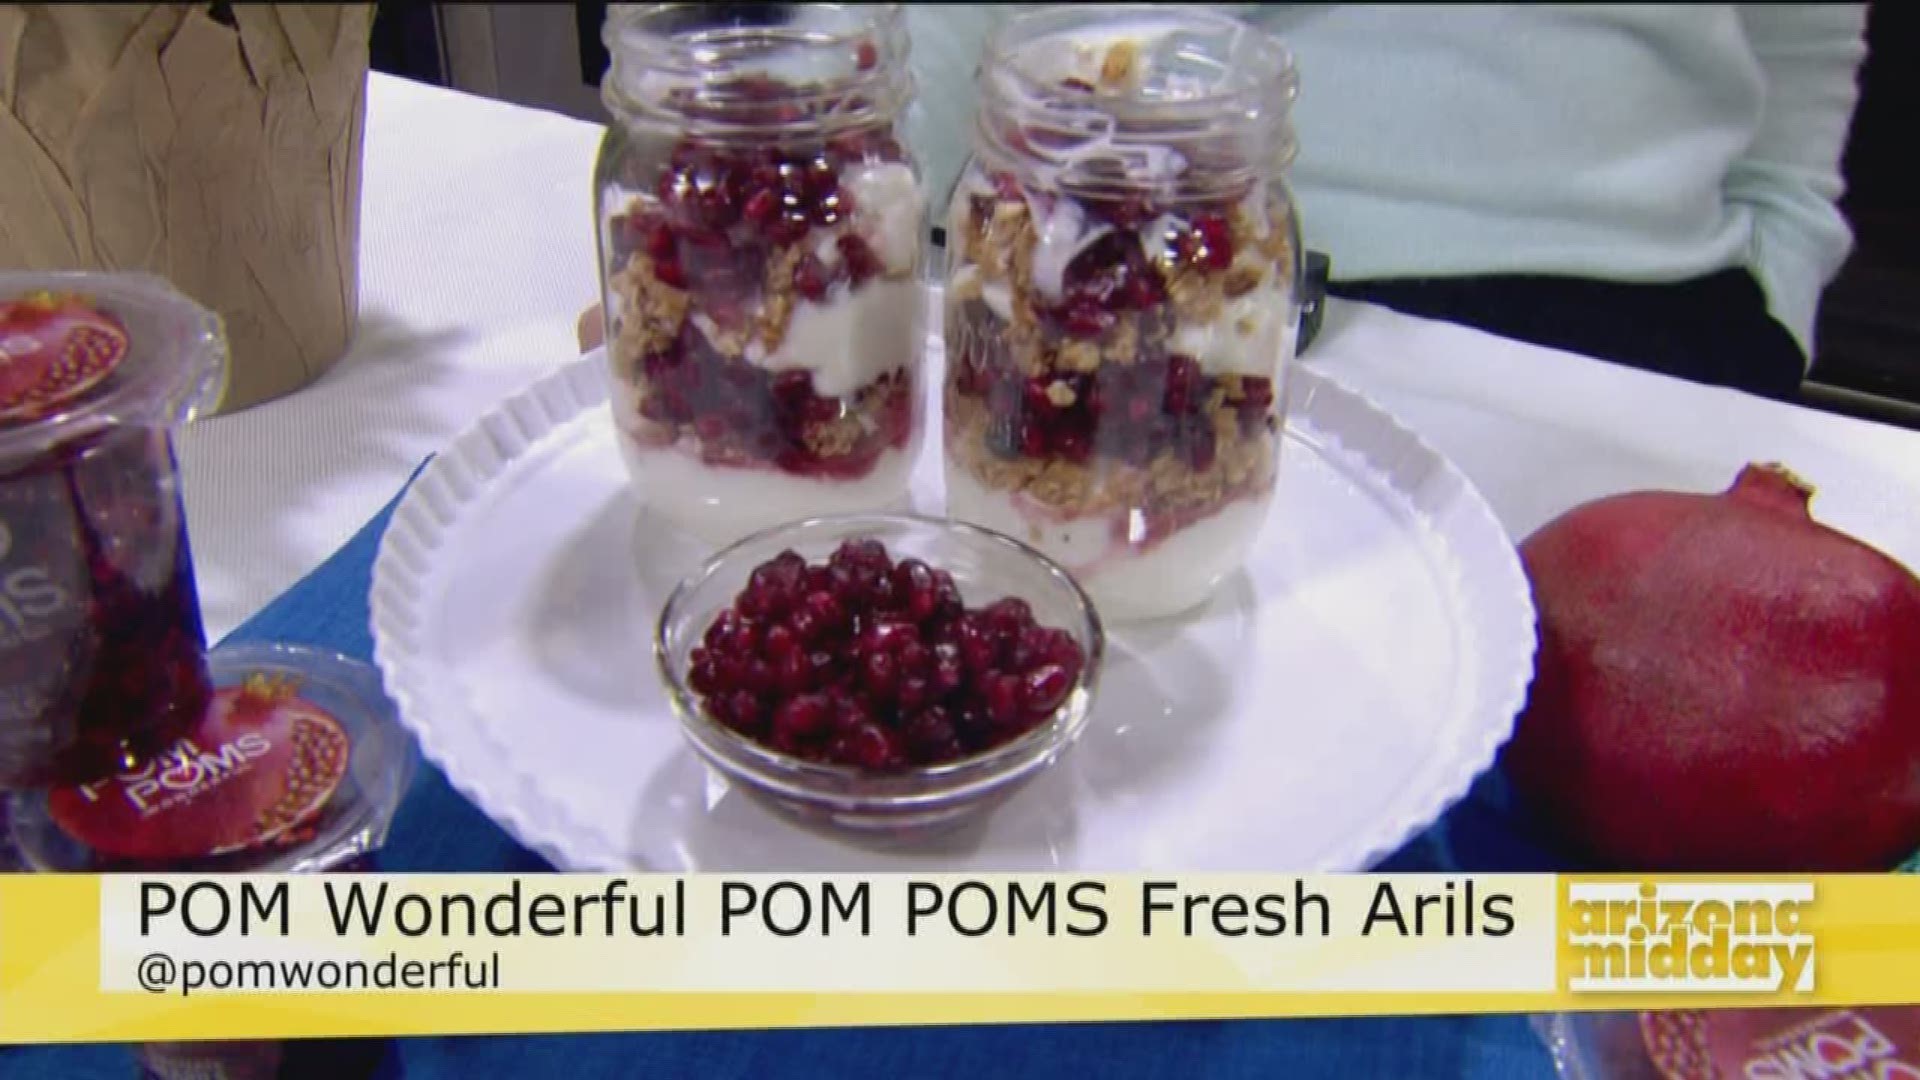 Gillean Barkyoumb MS, RD shows us some healthy snacks to help you get on your way to hitting your health goals.